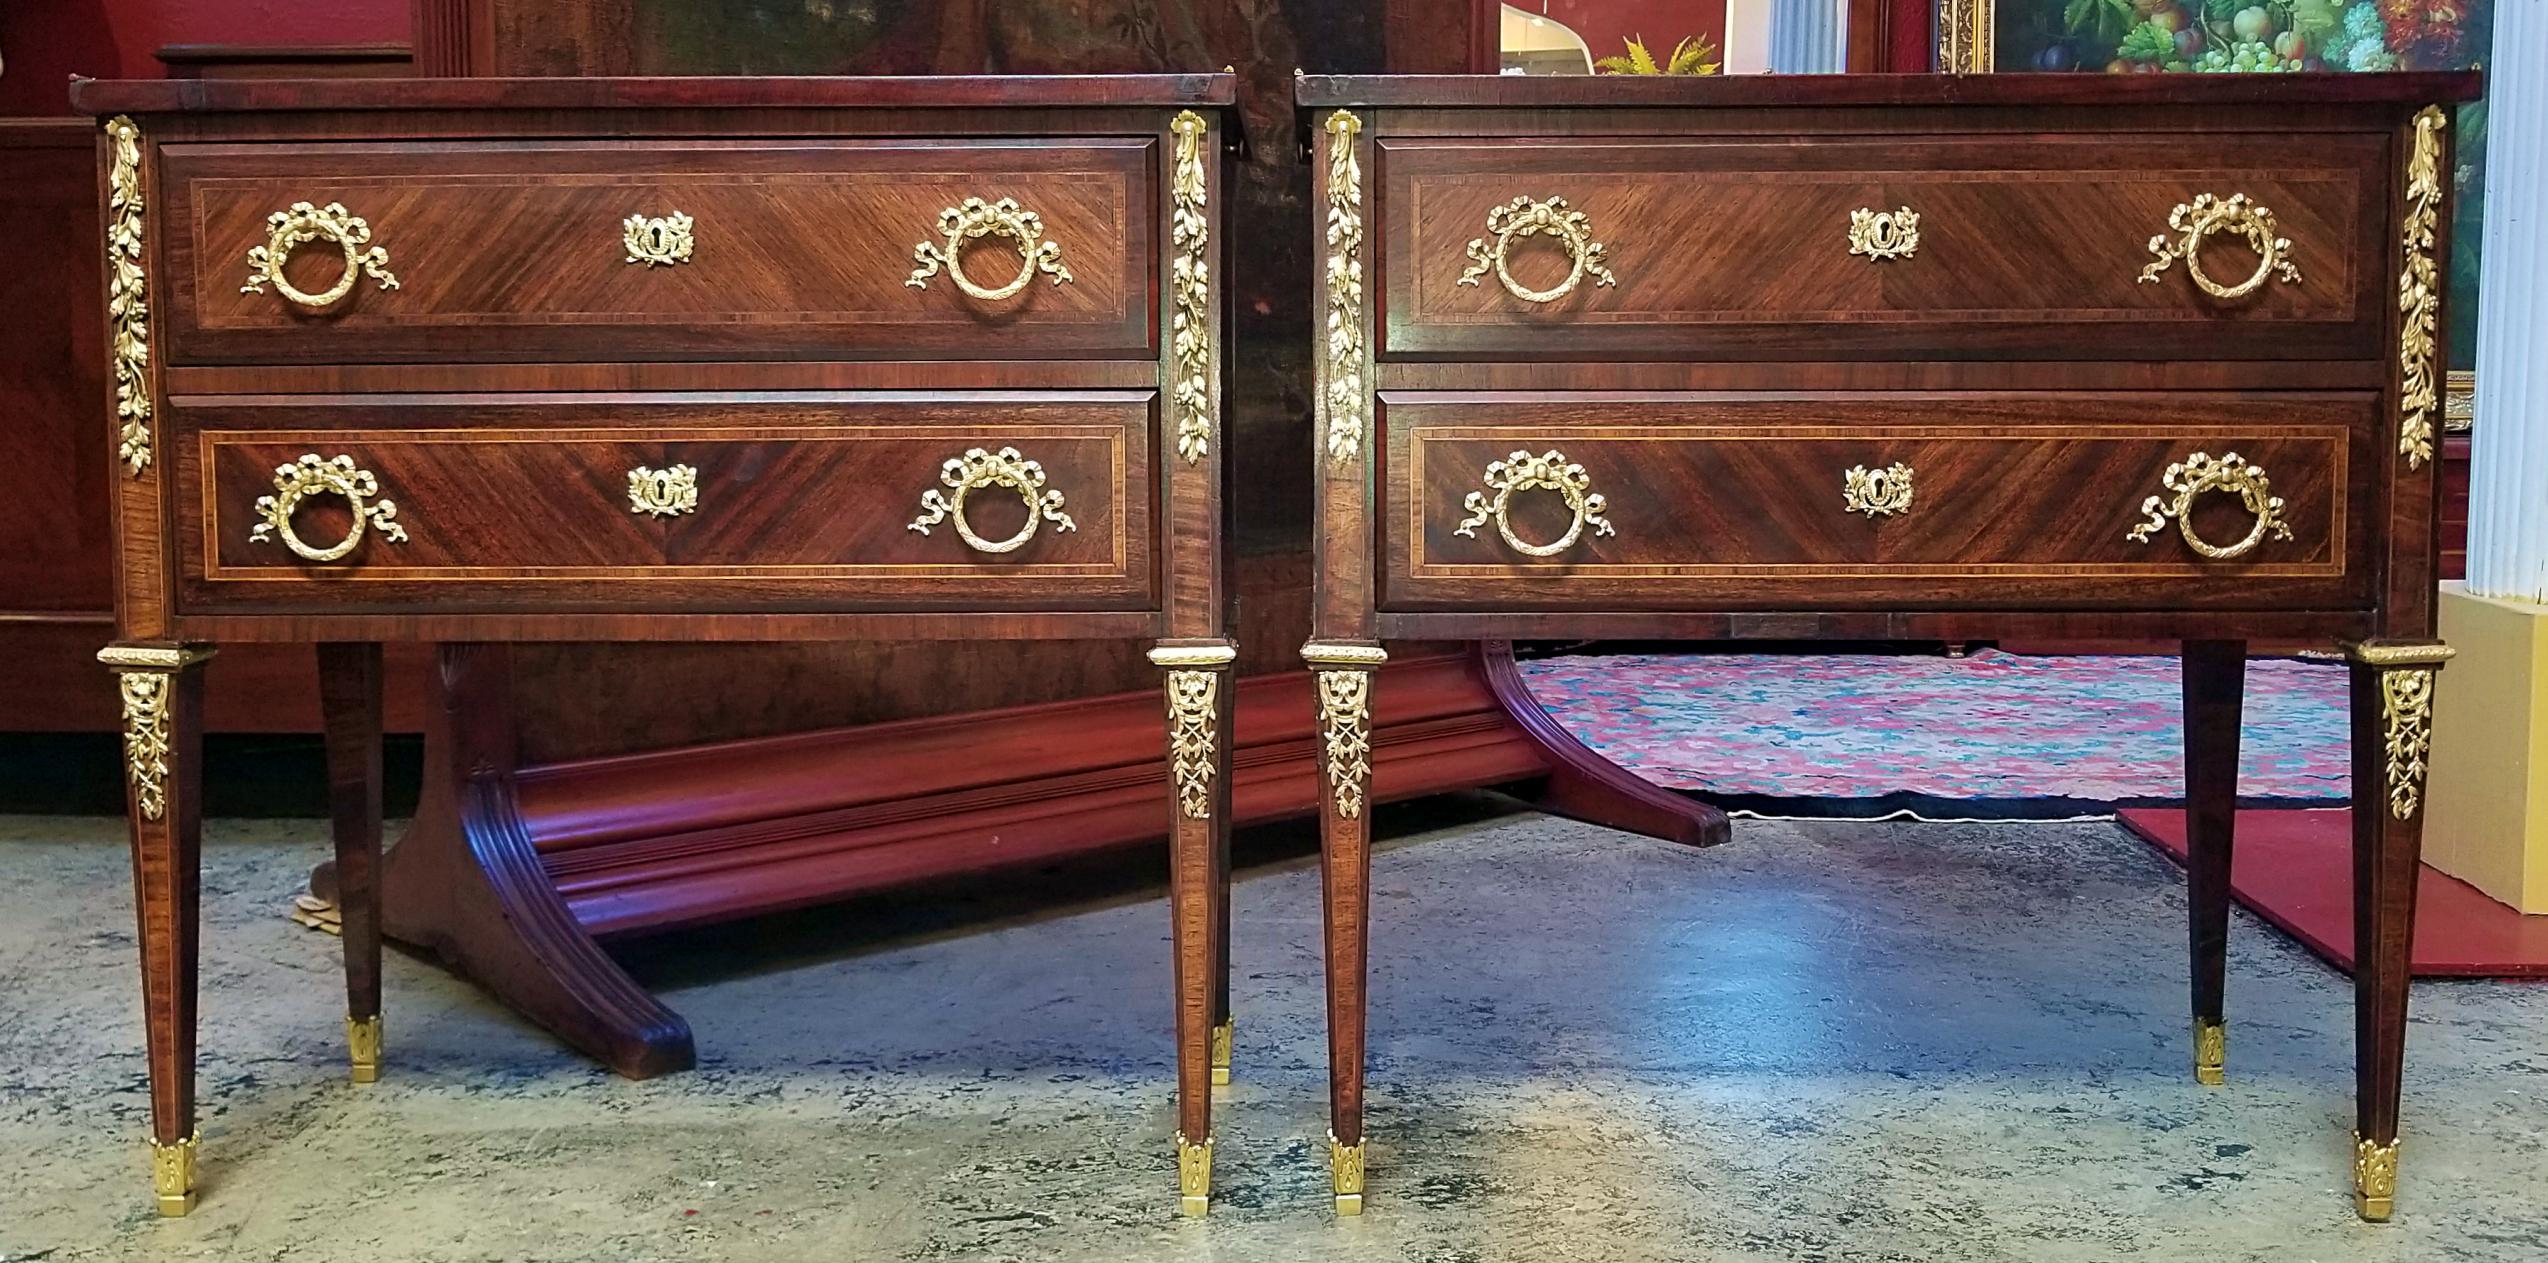 Presenting a matching pair of absolutely gorgeous 19th century Louis XVI style side tables of very high quality.

This pair of matching side tables or console tables are just stunning.

Made in the late 19th century circa 1880 and despite not